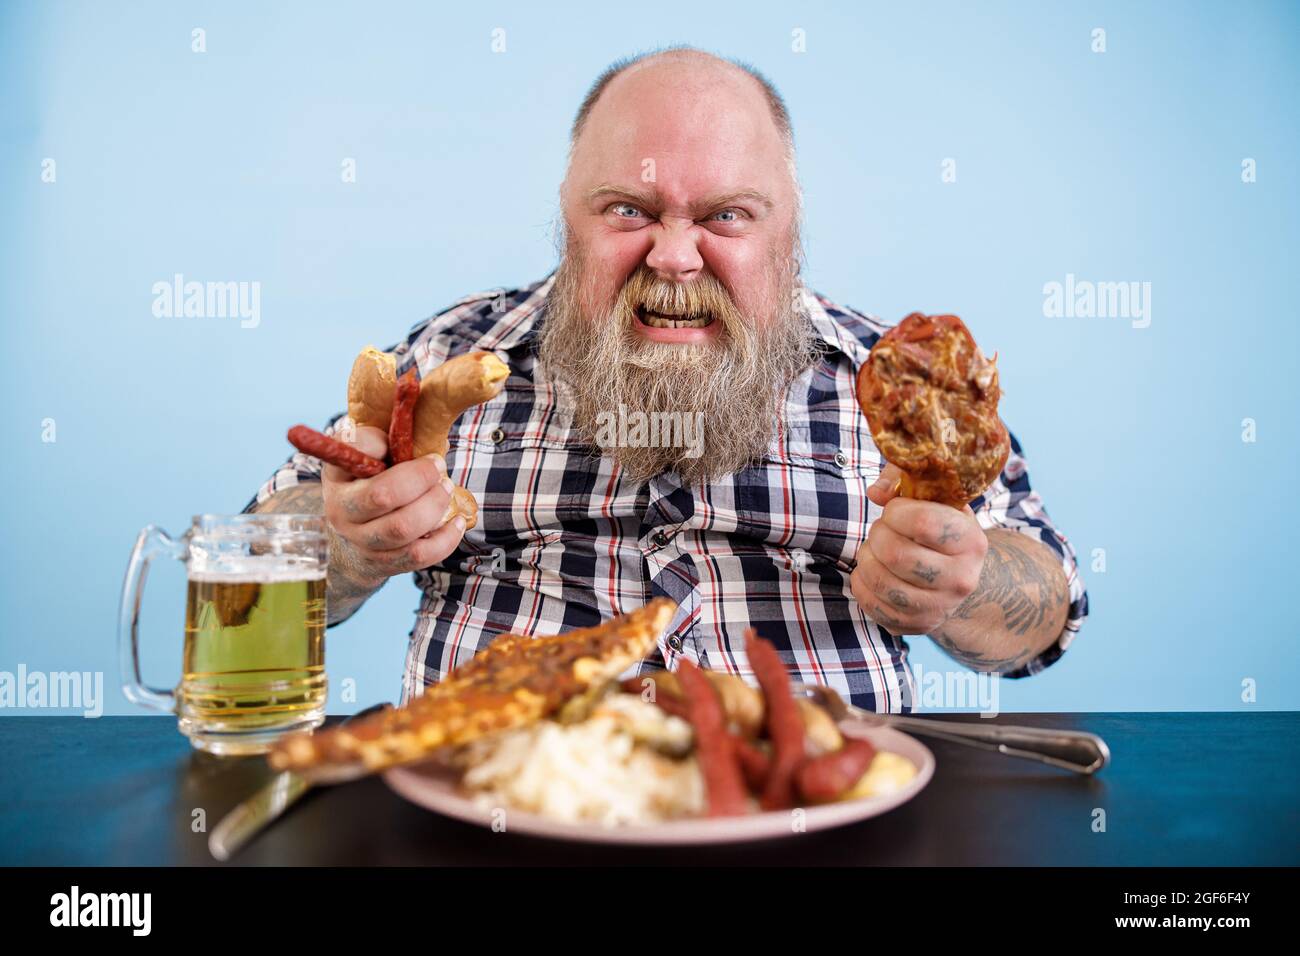 Angry man with overweight holds chicken leg and sausages at table with greasy food Stock Photo